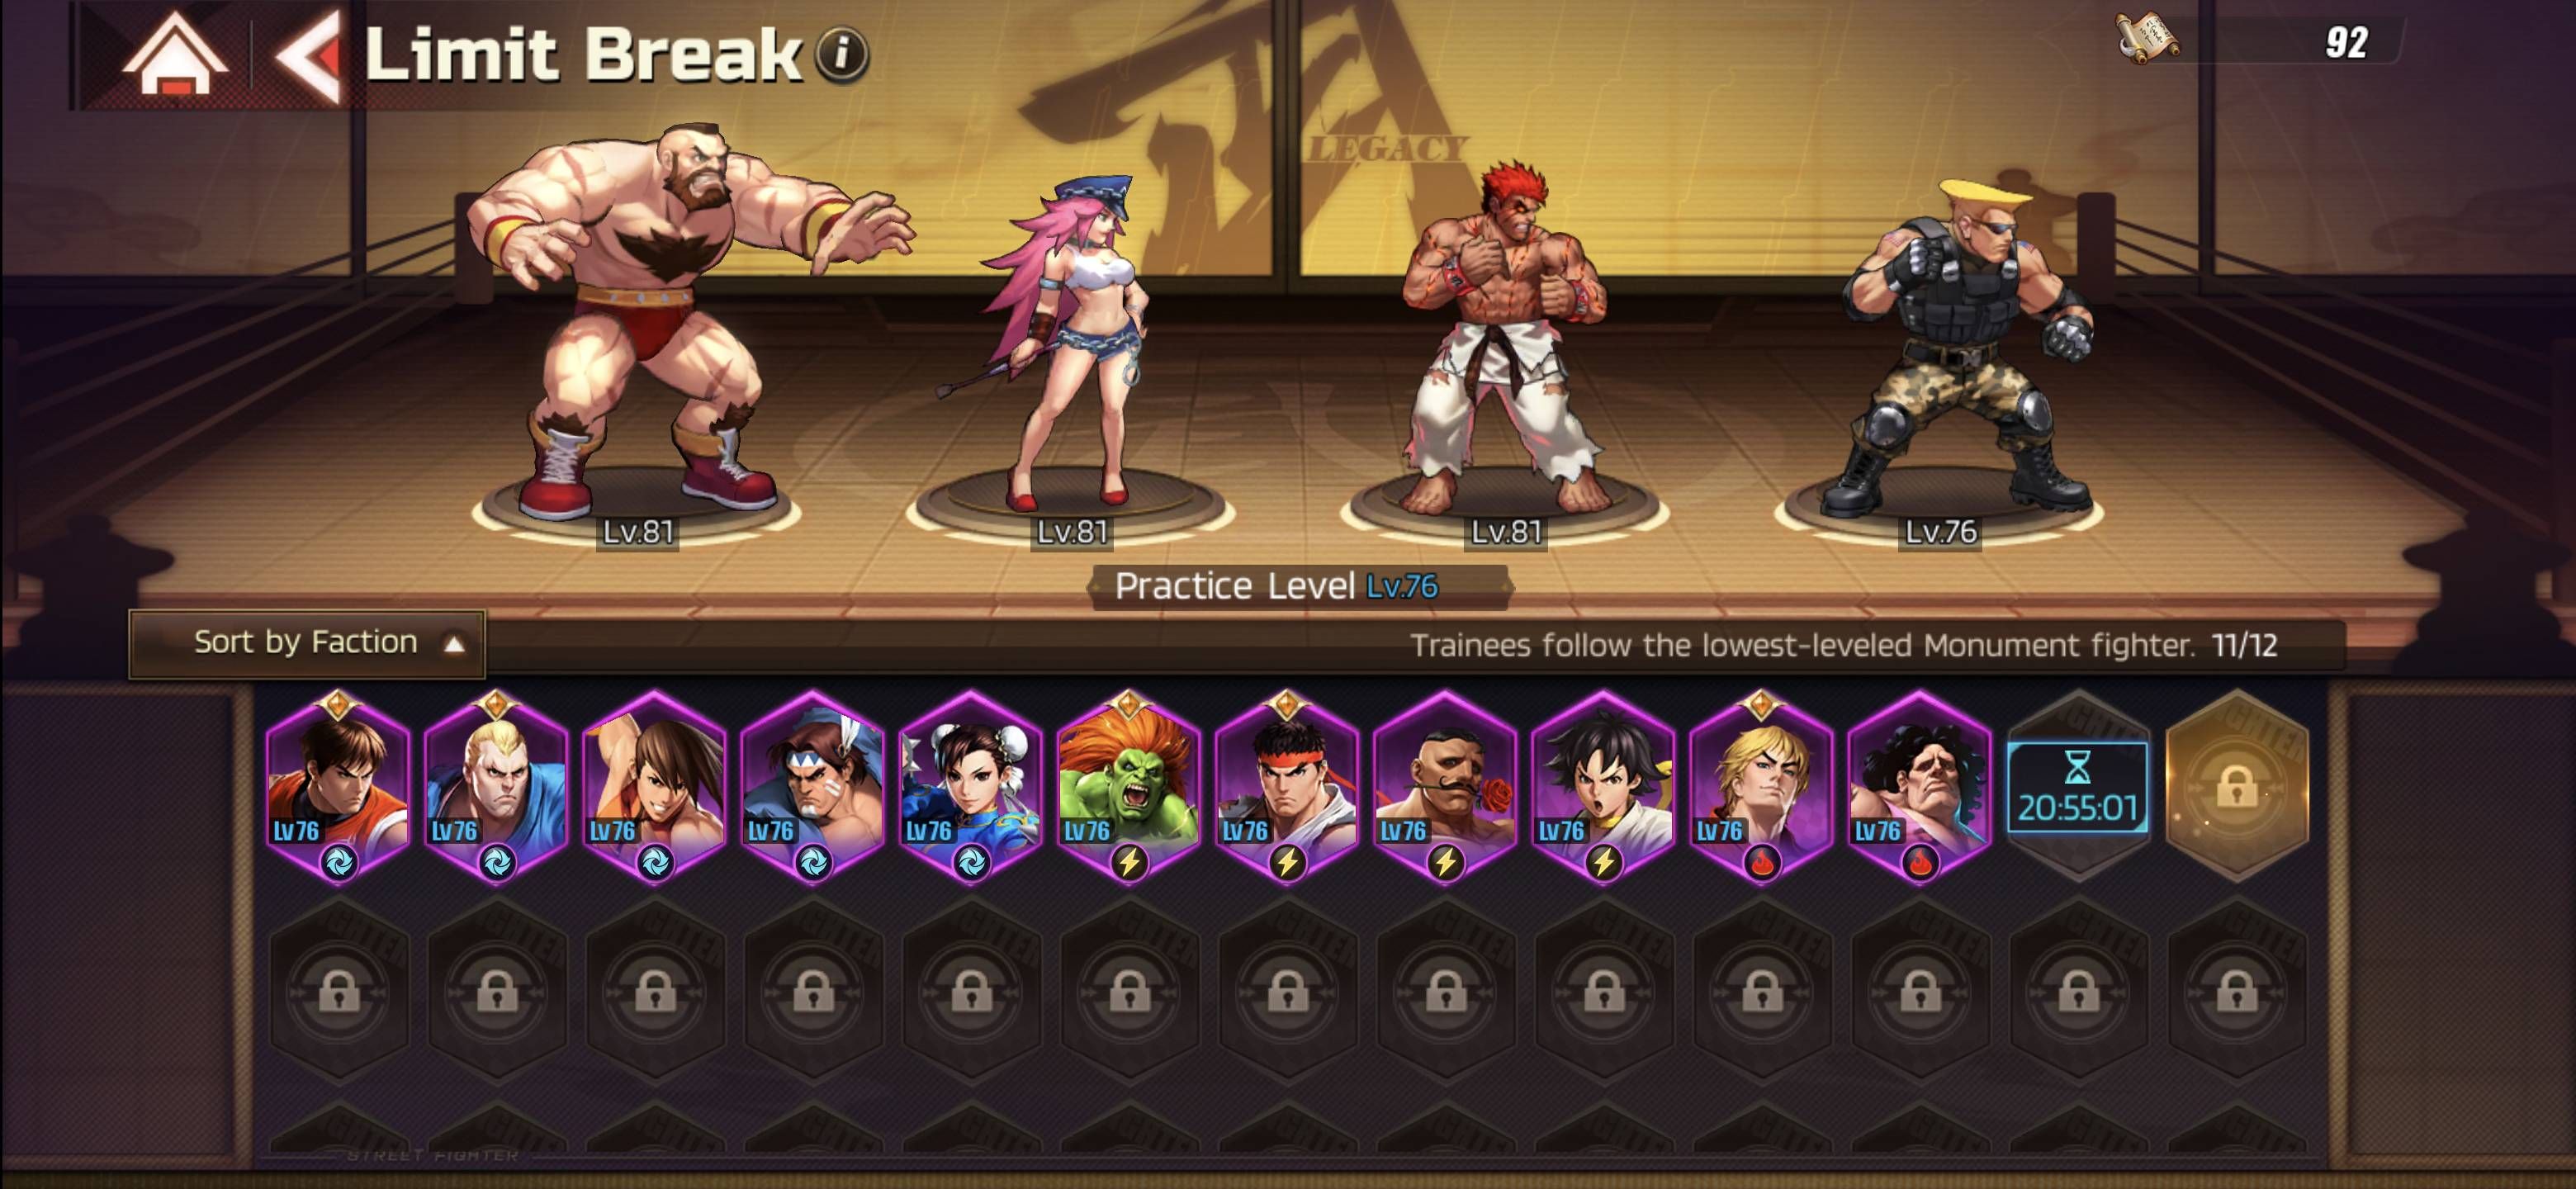 Street Fighter: Duel's Limit Break screen shows Zangief, Poison, Mad Ryu, and Combat Guile as Monument Fighter